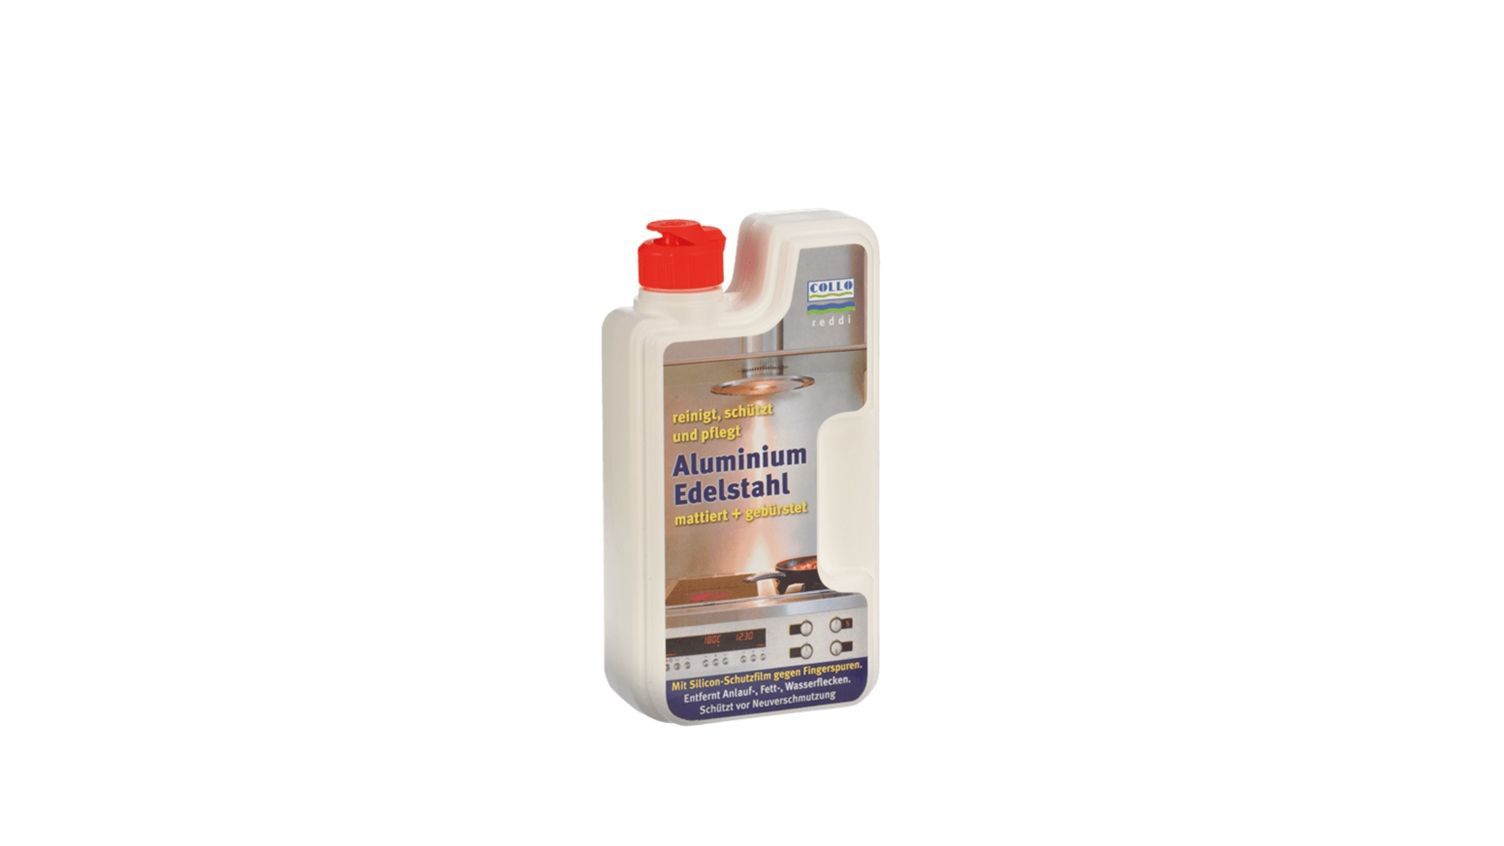 Cleaning Agent (Restores Shine, Removes Grease and Water Stains, 250ml) for Bosch Siemens Stainless Steel & Aluminum - 00461731 BSH - Bosch / Siemens